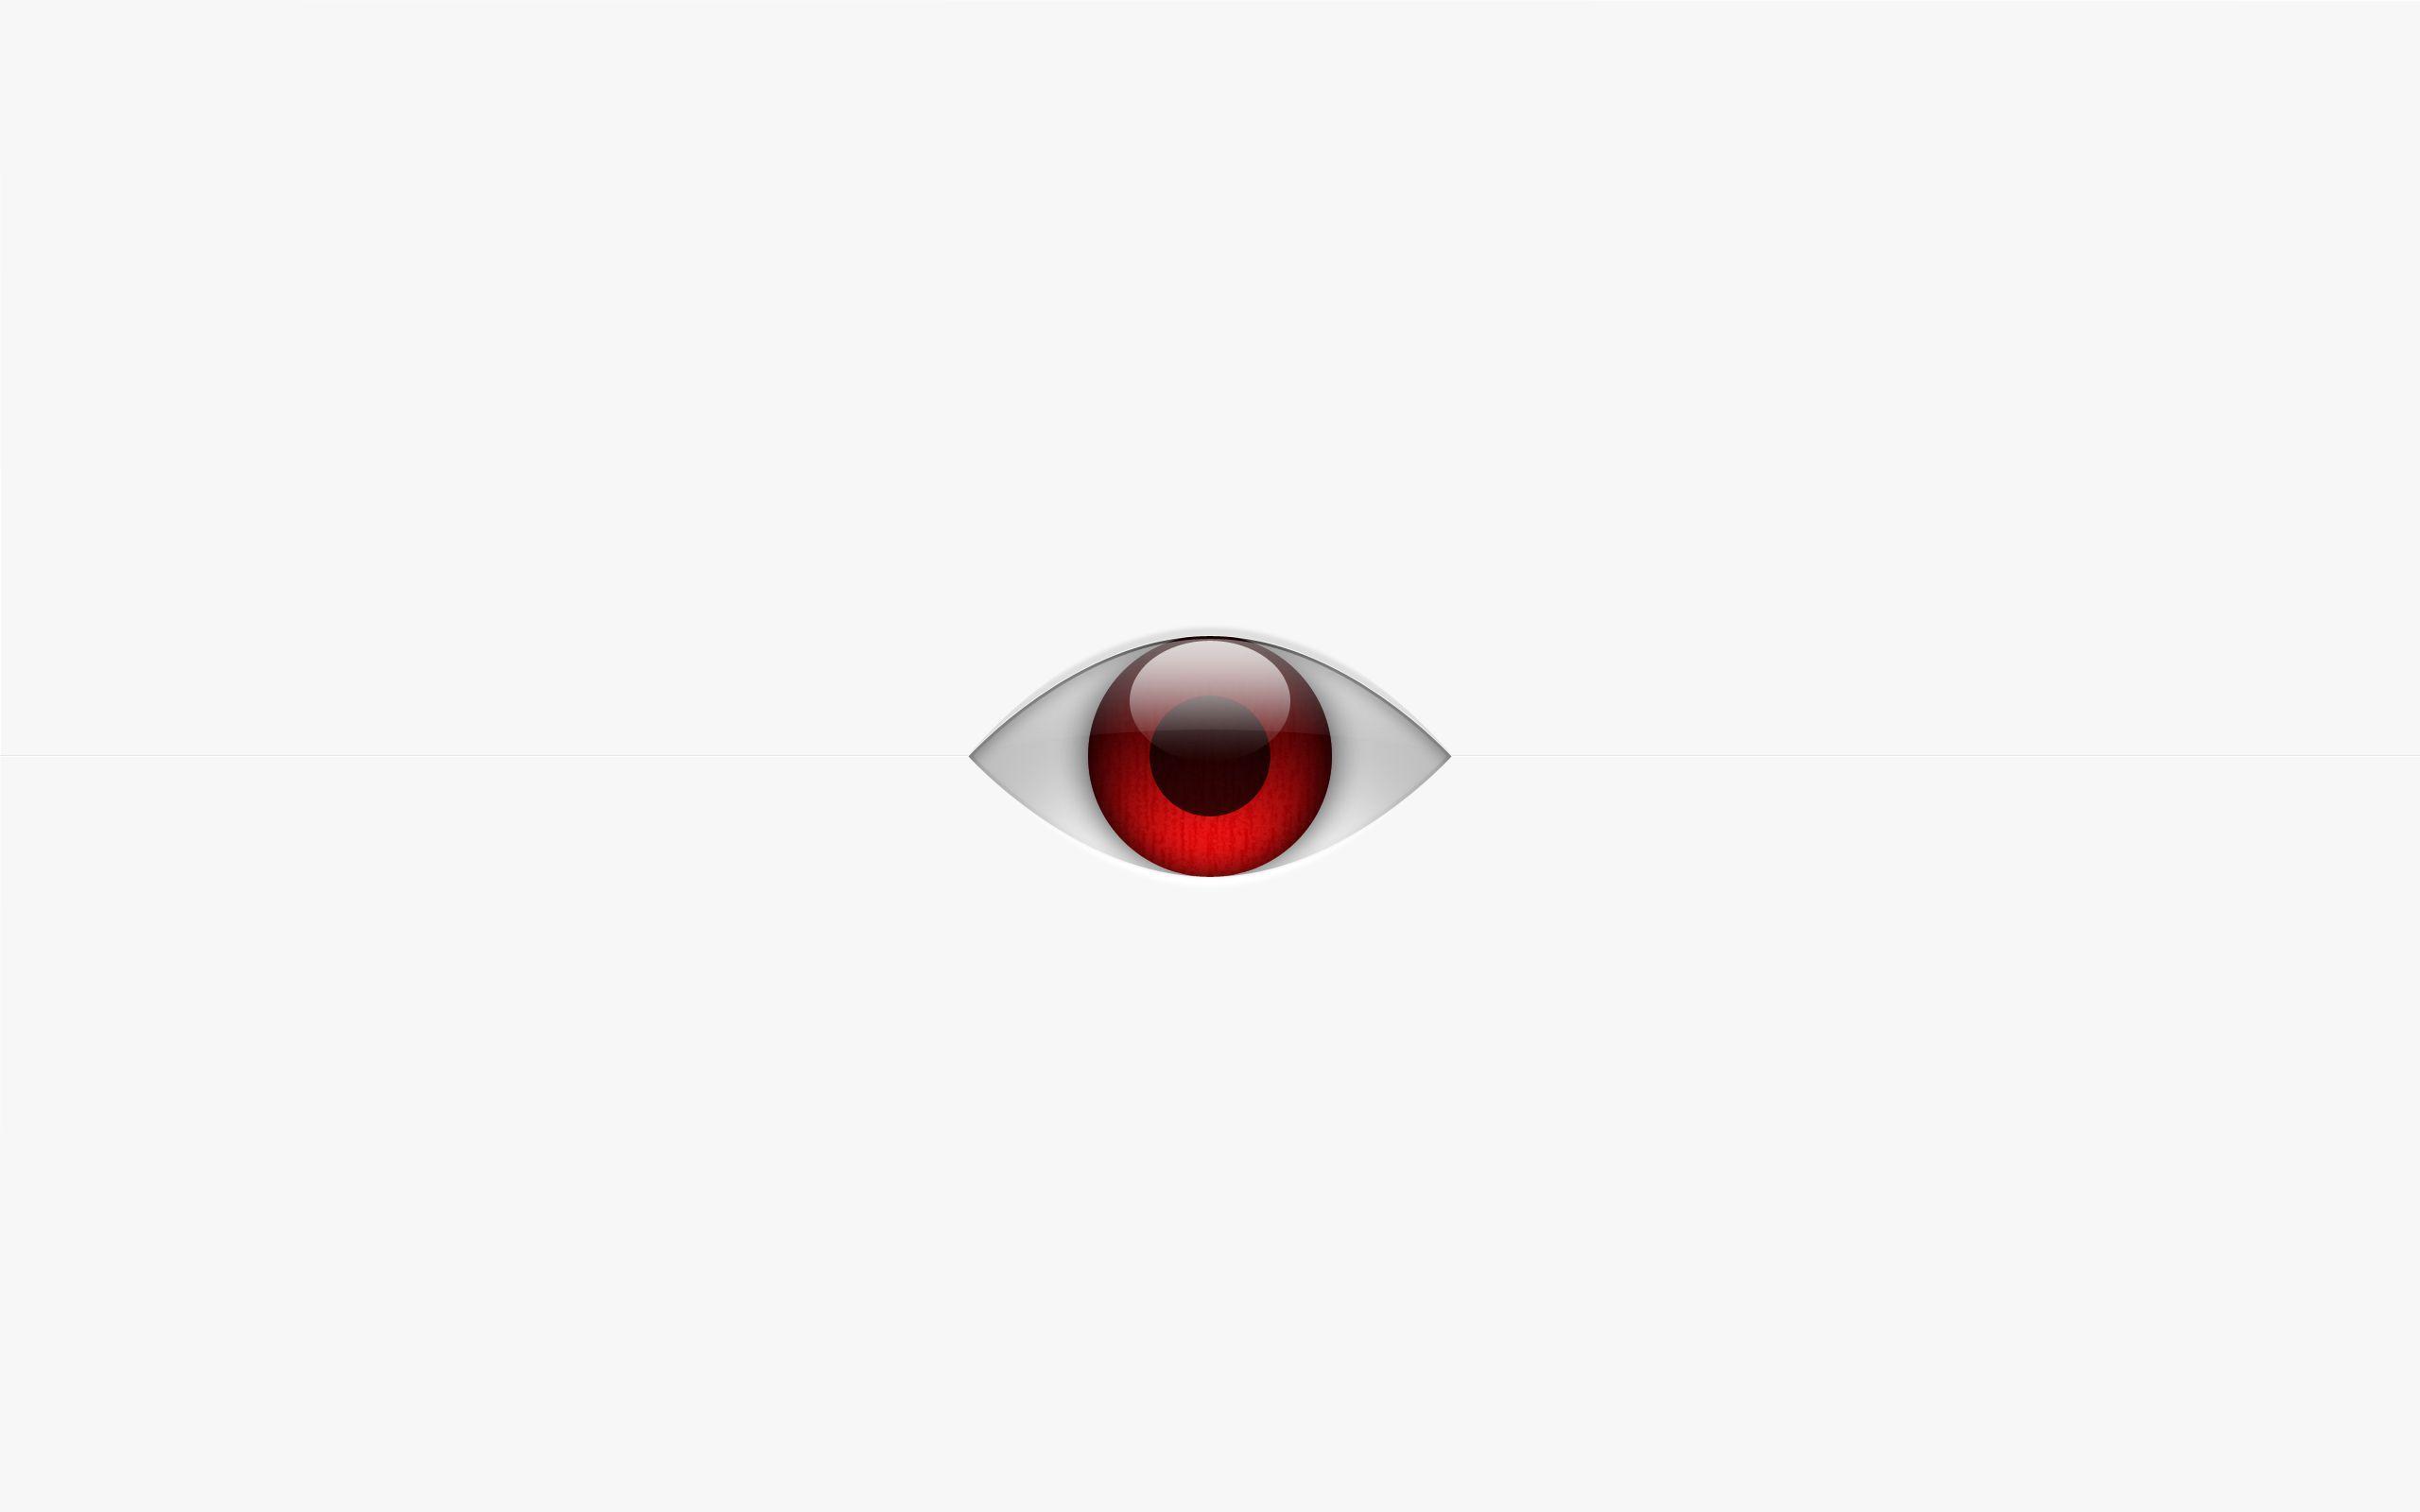 Abstract Red Eye widescreen wallpaper. Wide